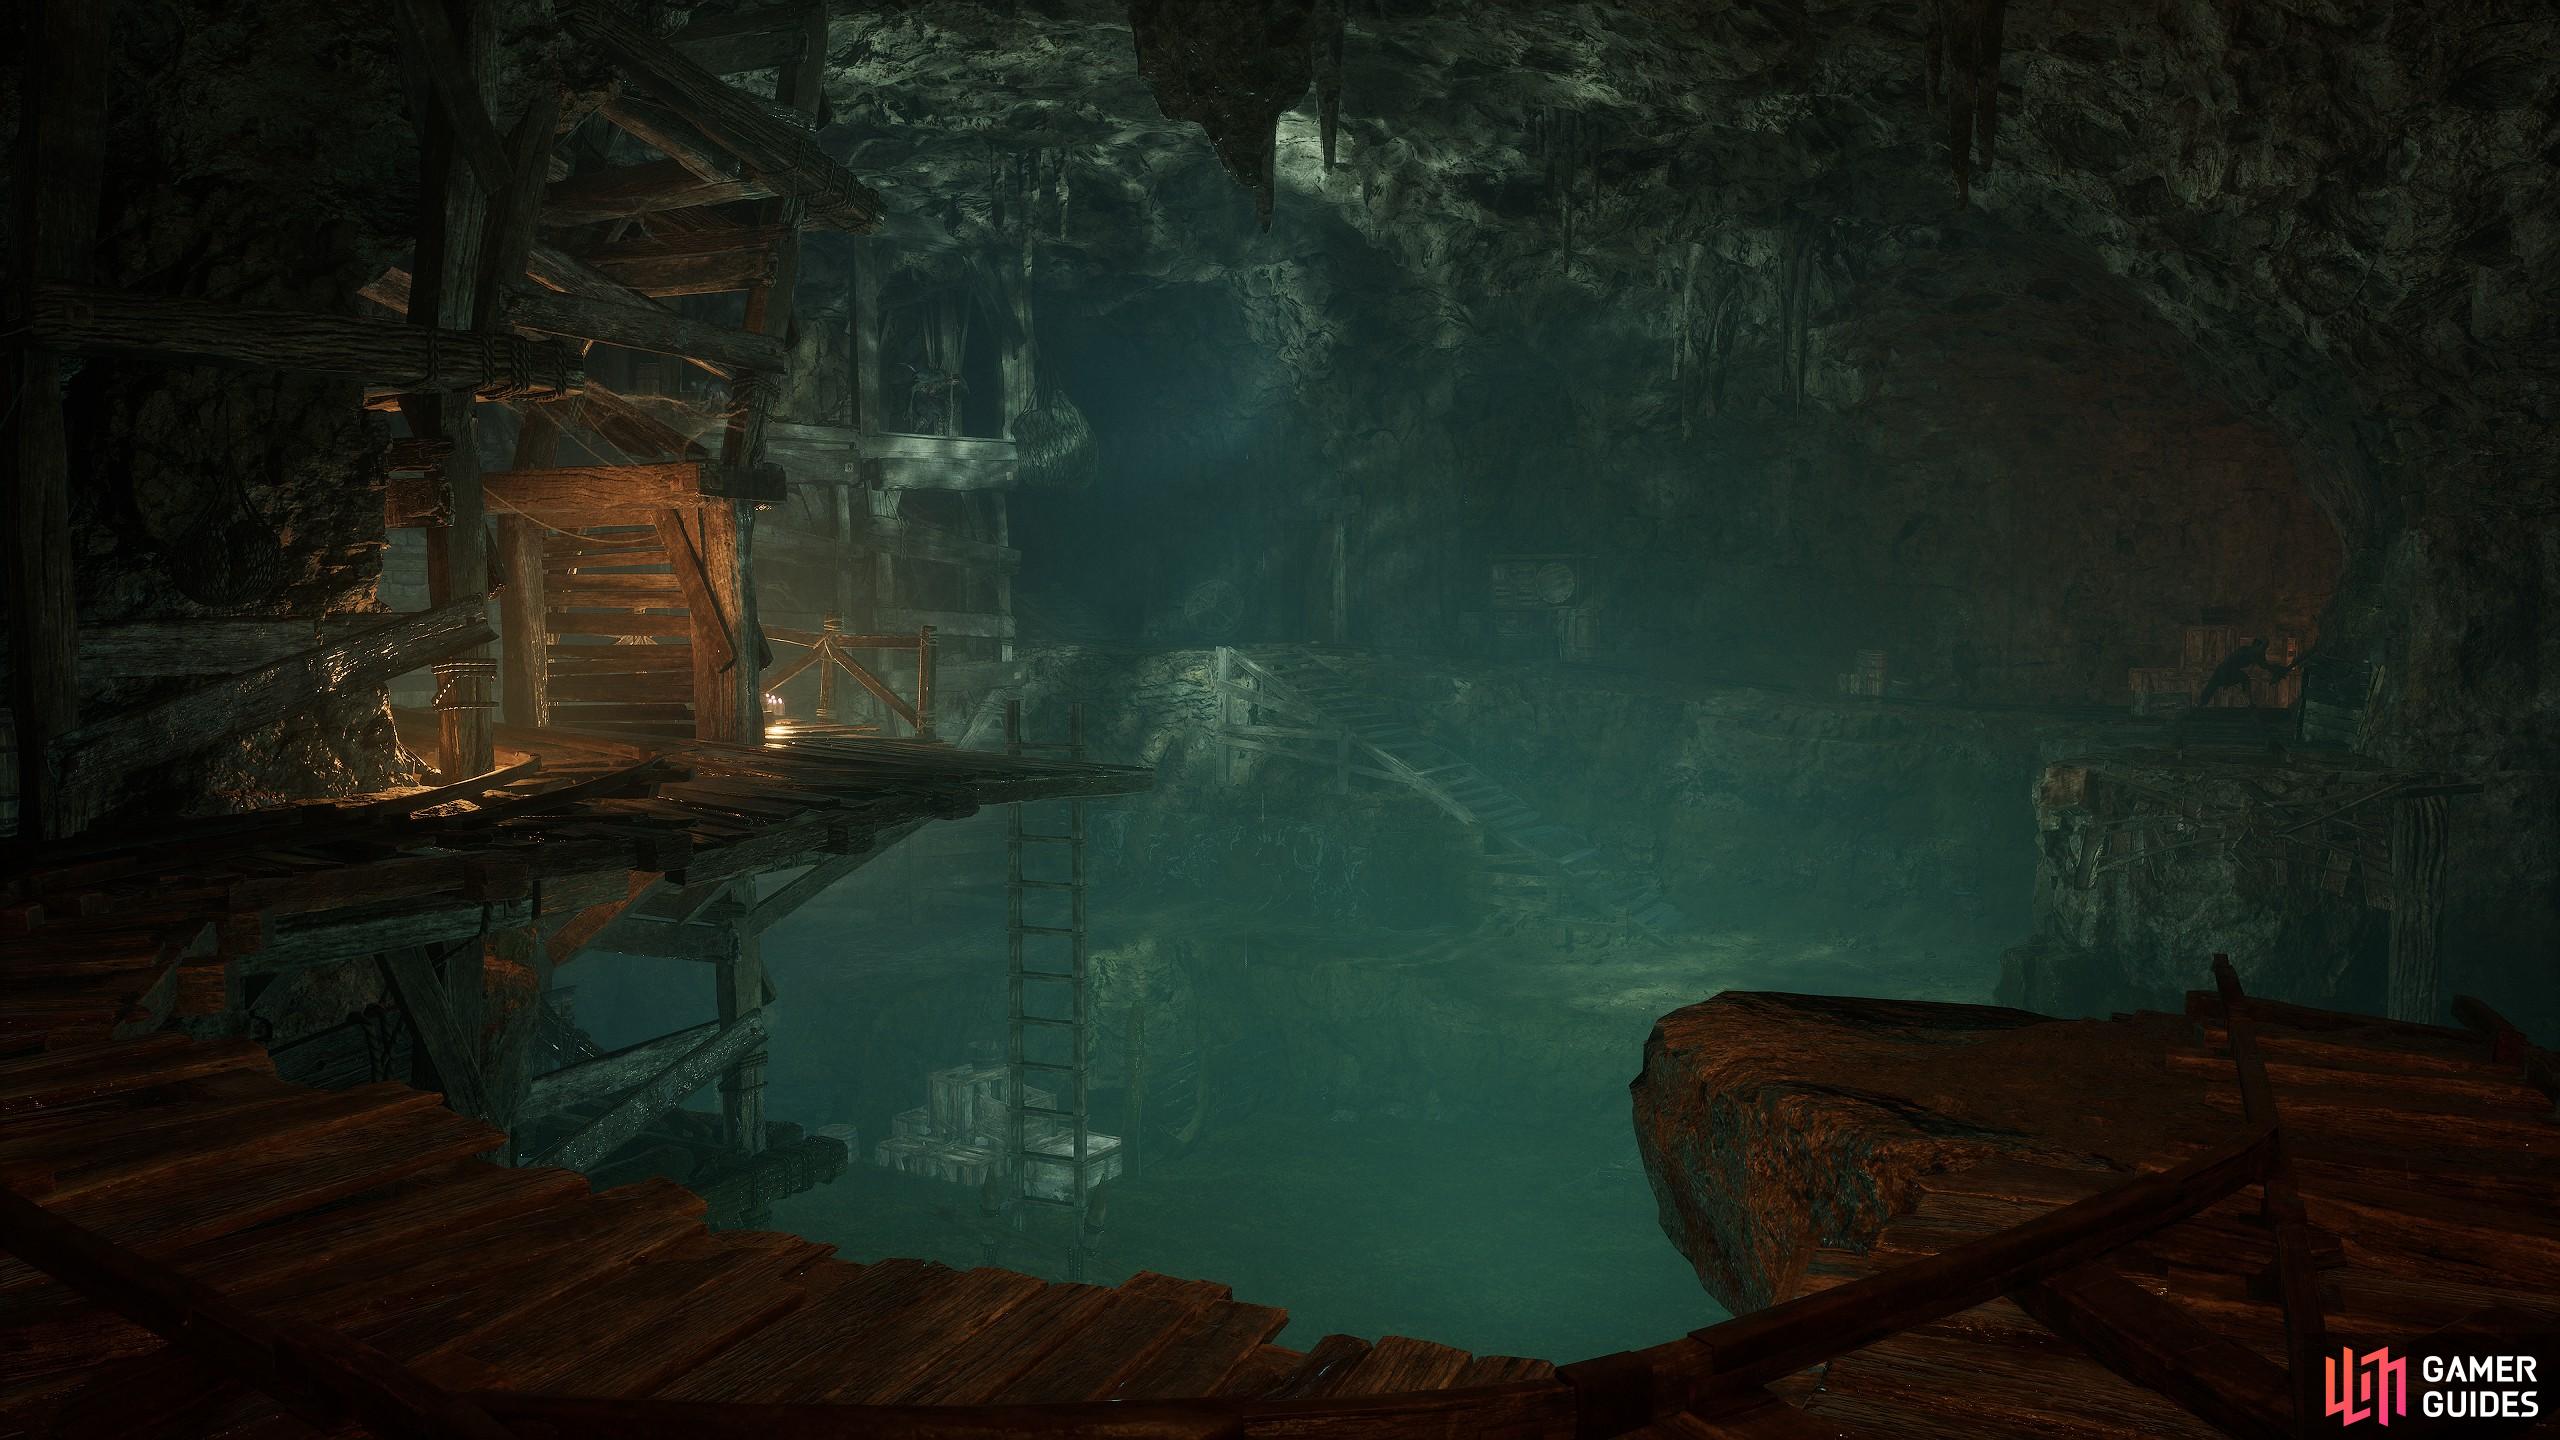 The Sunless Skein Walkthrough requires some exploration in its winding caves. Yet, its pathways lead you to the progression blockers, with a slight Umbral puzzle to solve to drain the water at the end.